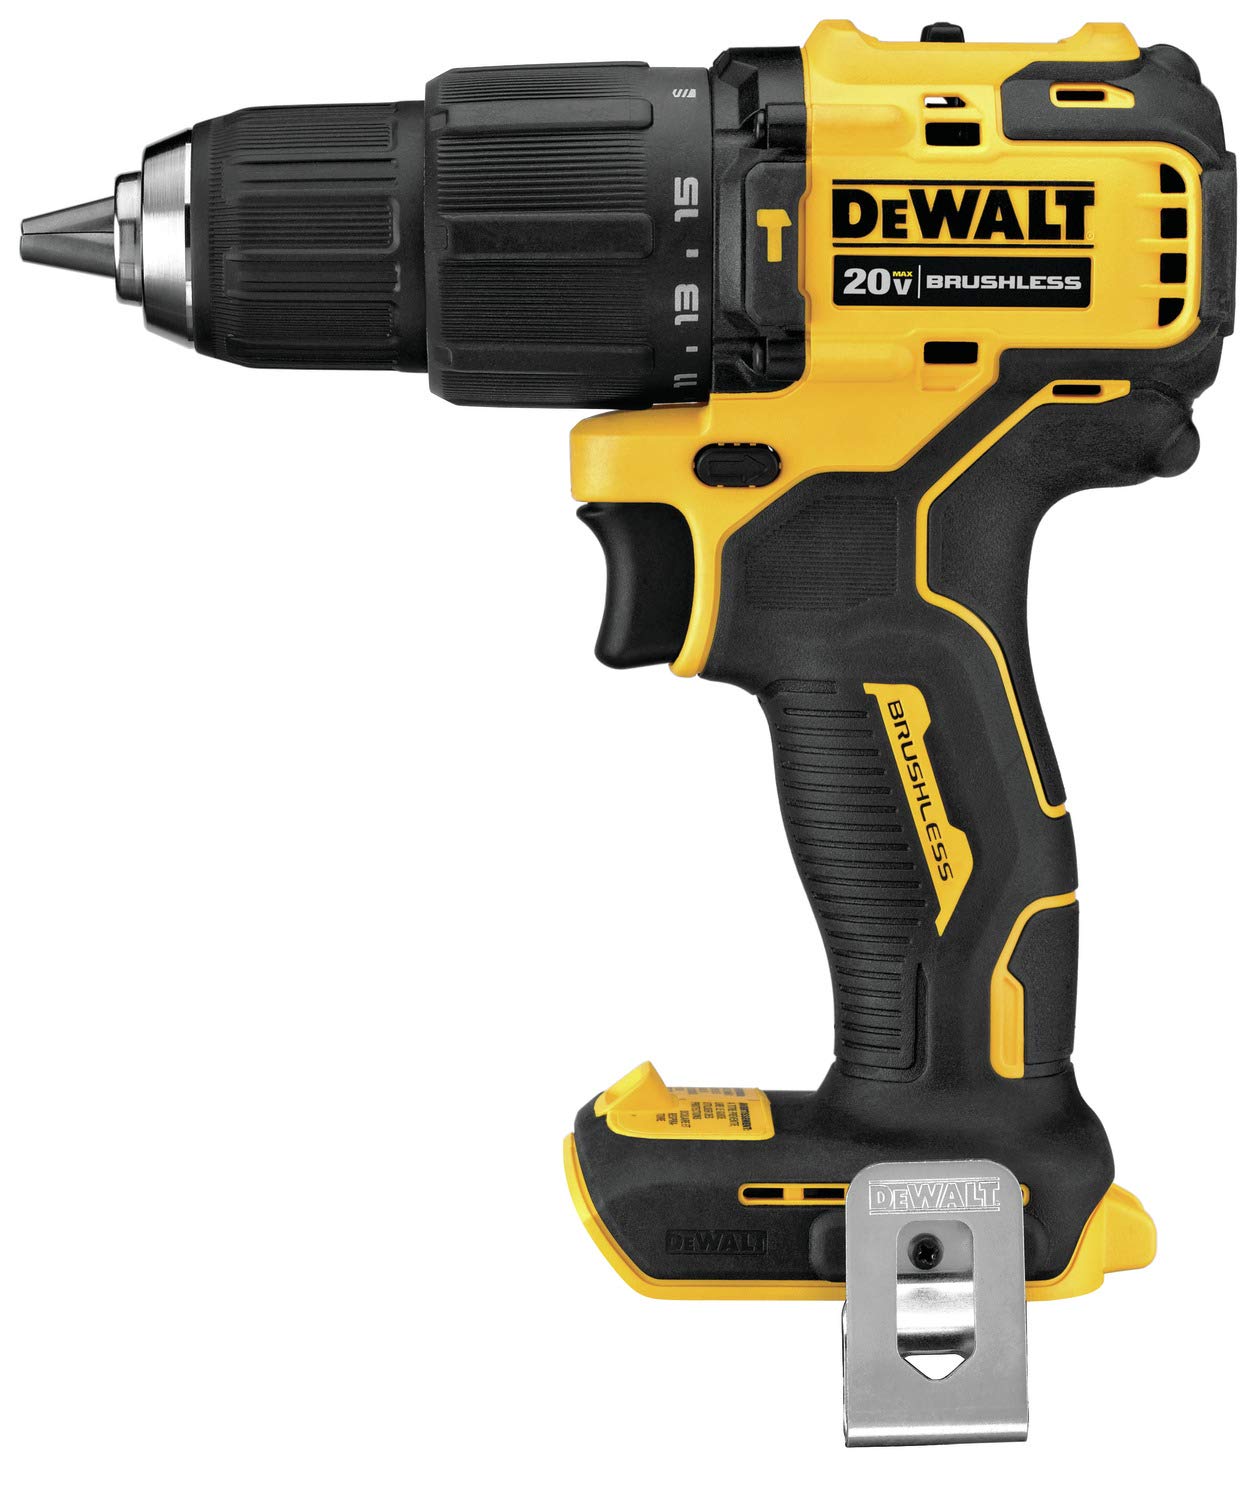 DEWALT ATOMIC 20V MAX* Hammer Drill, Cordless, Compact, 1/2-Inch, Tool Only (DCD709B)